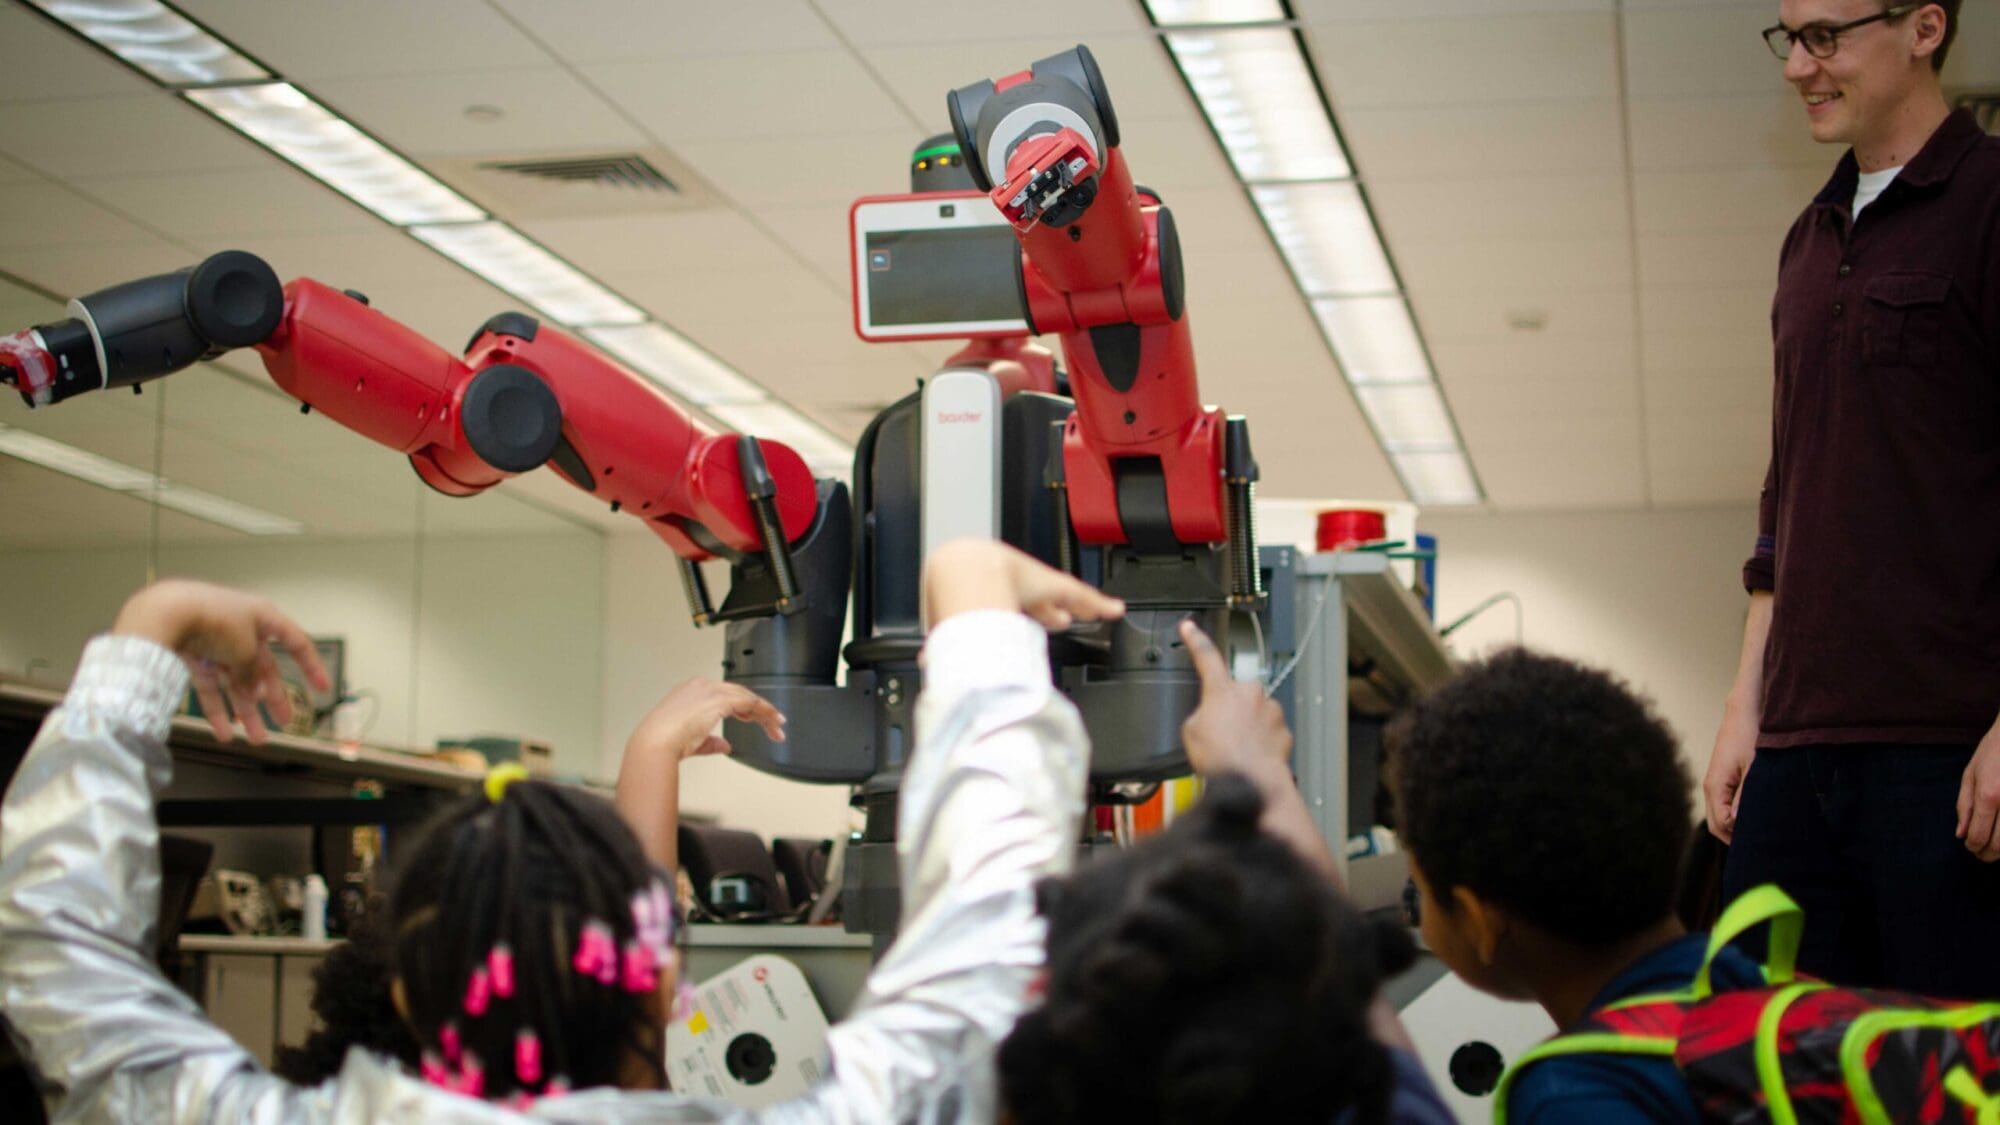 Elementary schoolers moving arms along with educational robot